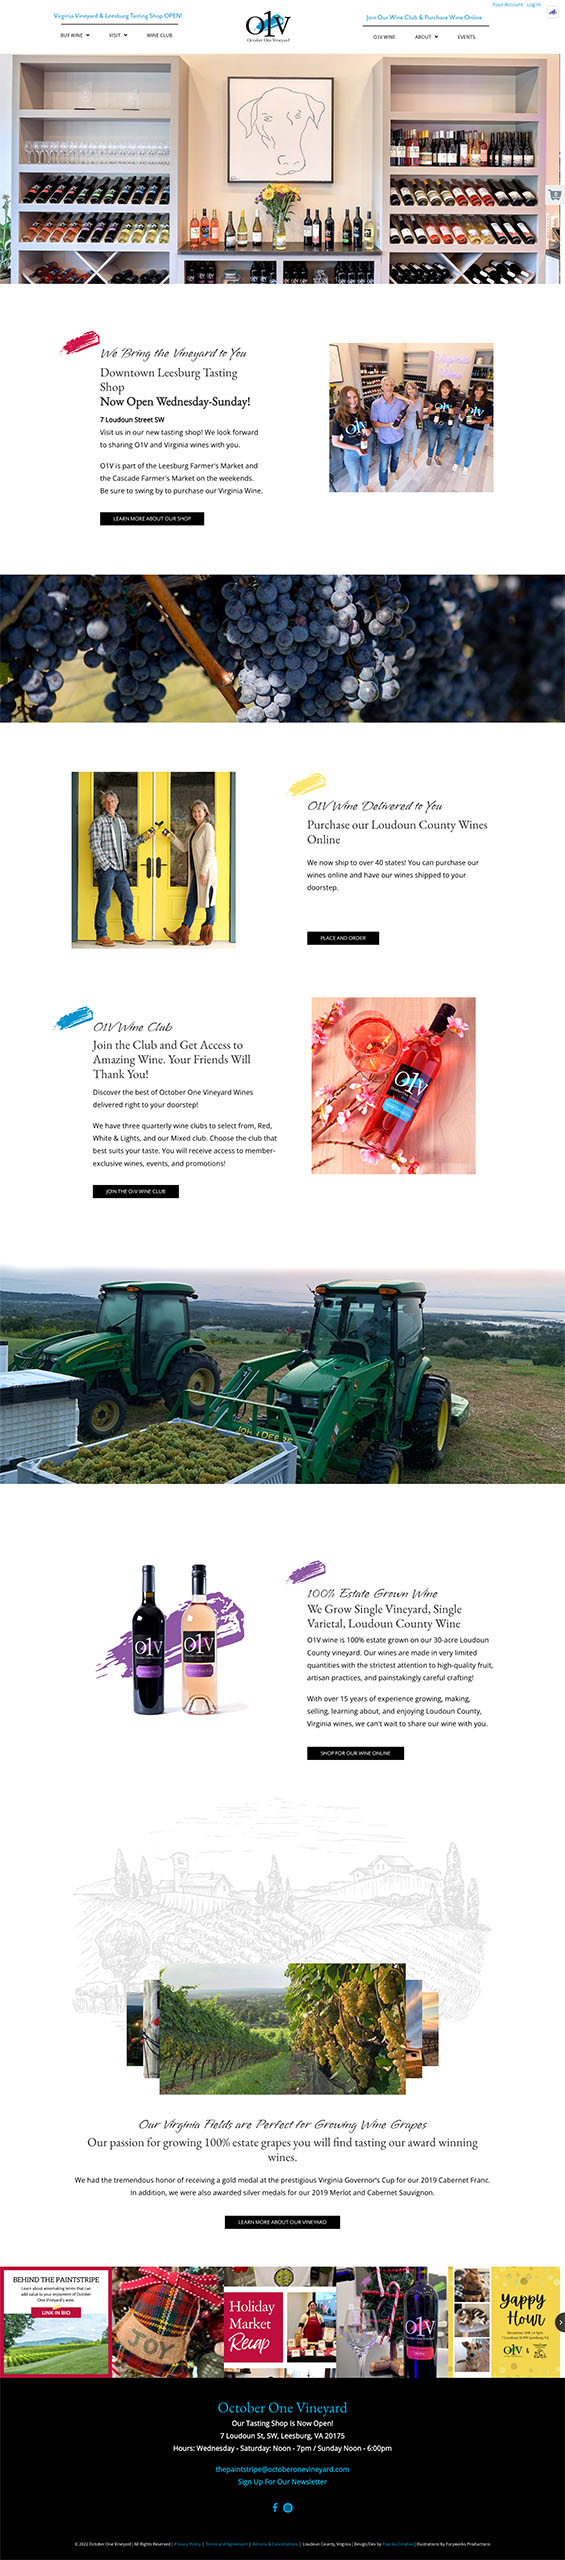 Winery Website design and development showing Leesburg Winery home page